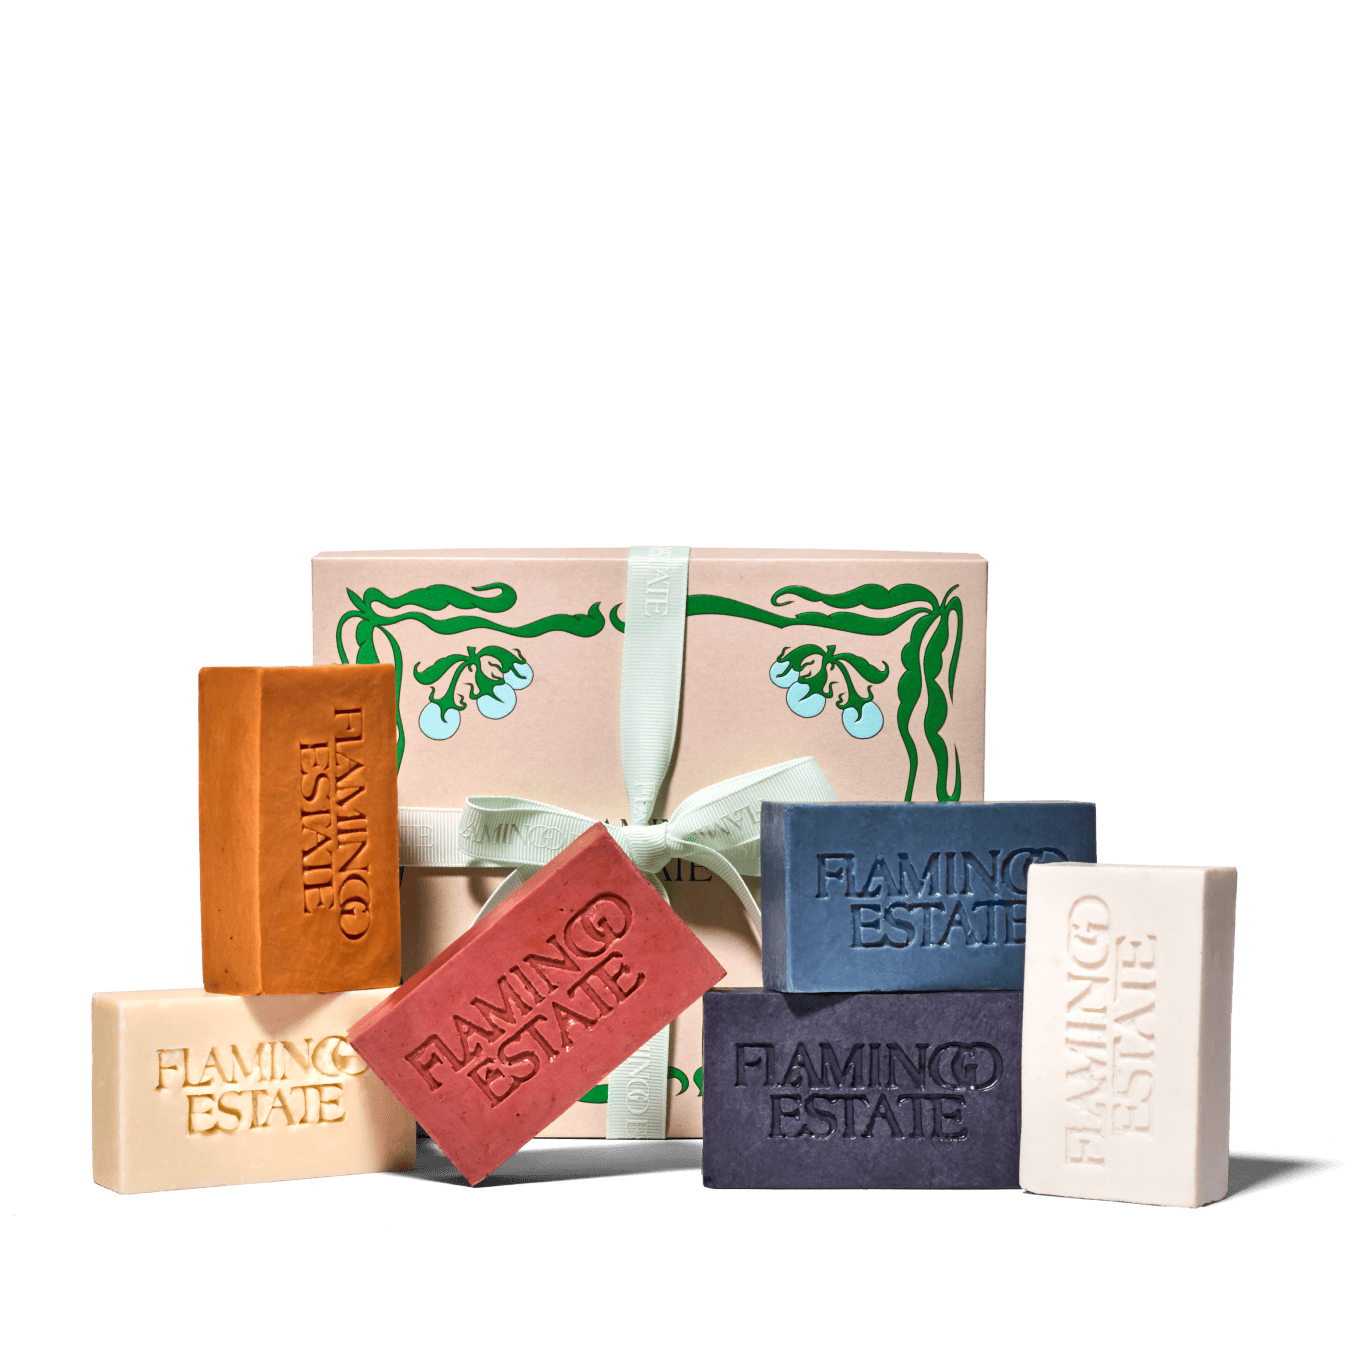 Colorful Blocks Of Flamingo Estate Soaps Presented in Front of Pink Packaging Box